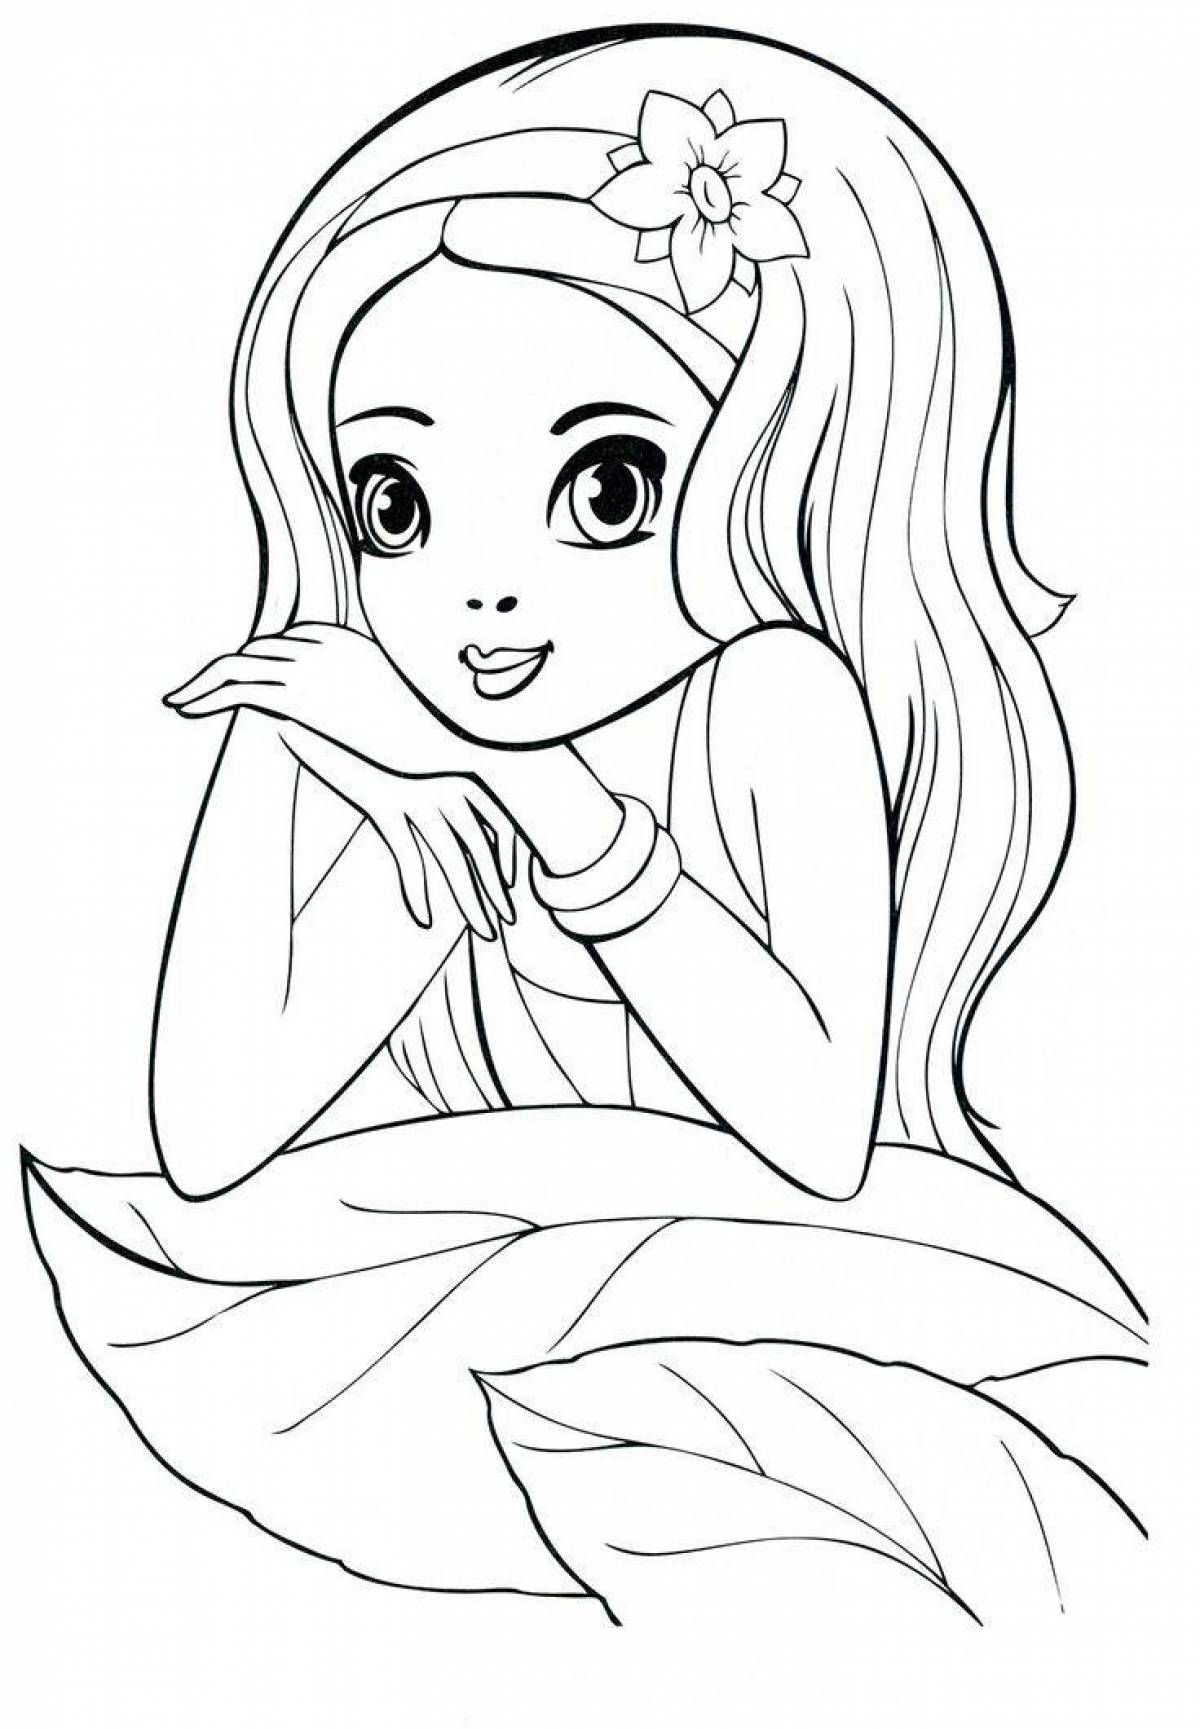 Playful coloring pages for girls